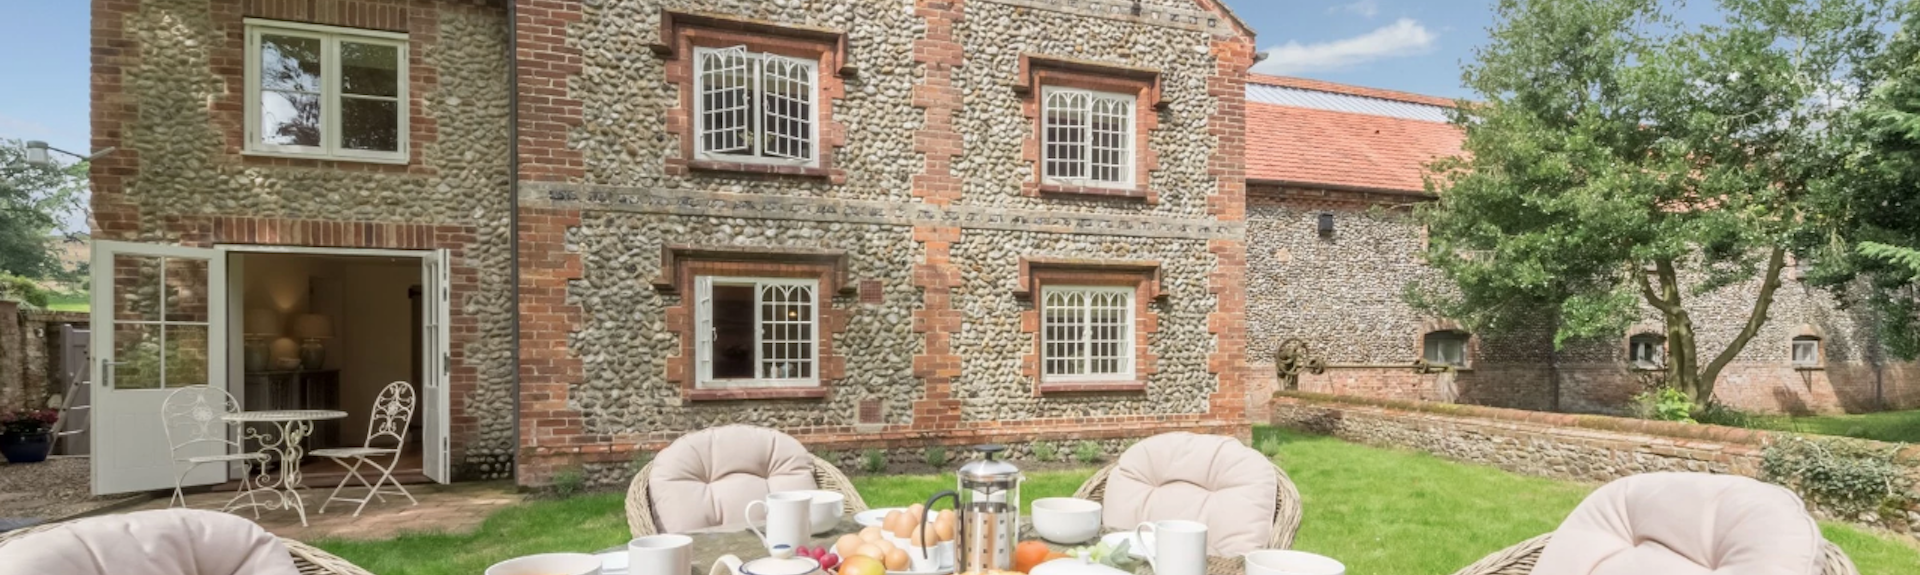 A large stone cottage buklt with pebble and brick oveerlooks a lawn on which is a wicker table and chairs laid for breakfast.